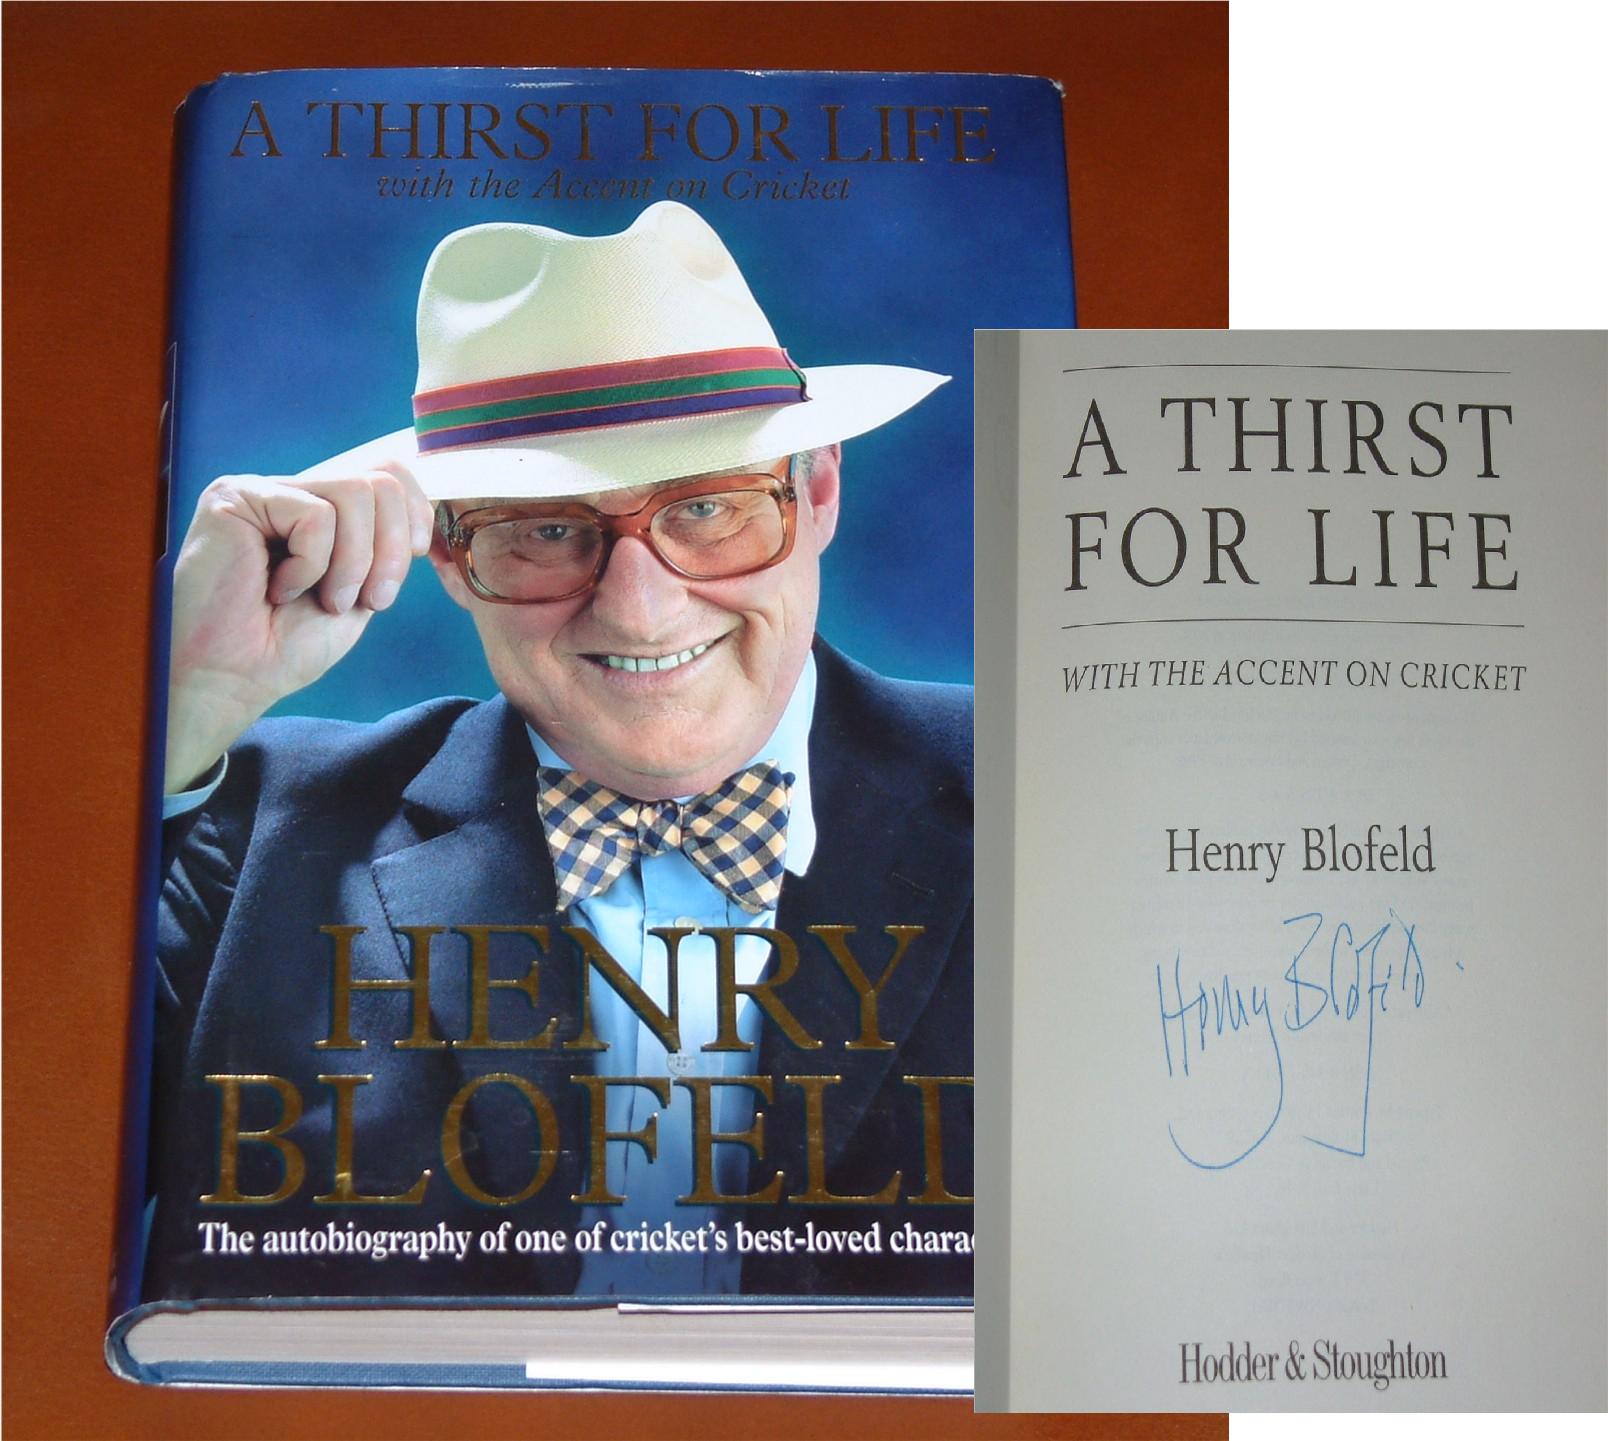 HENRY BLOFELD SIGNED HARDBACK A THIRST FOR LIFE